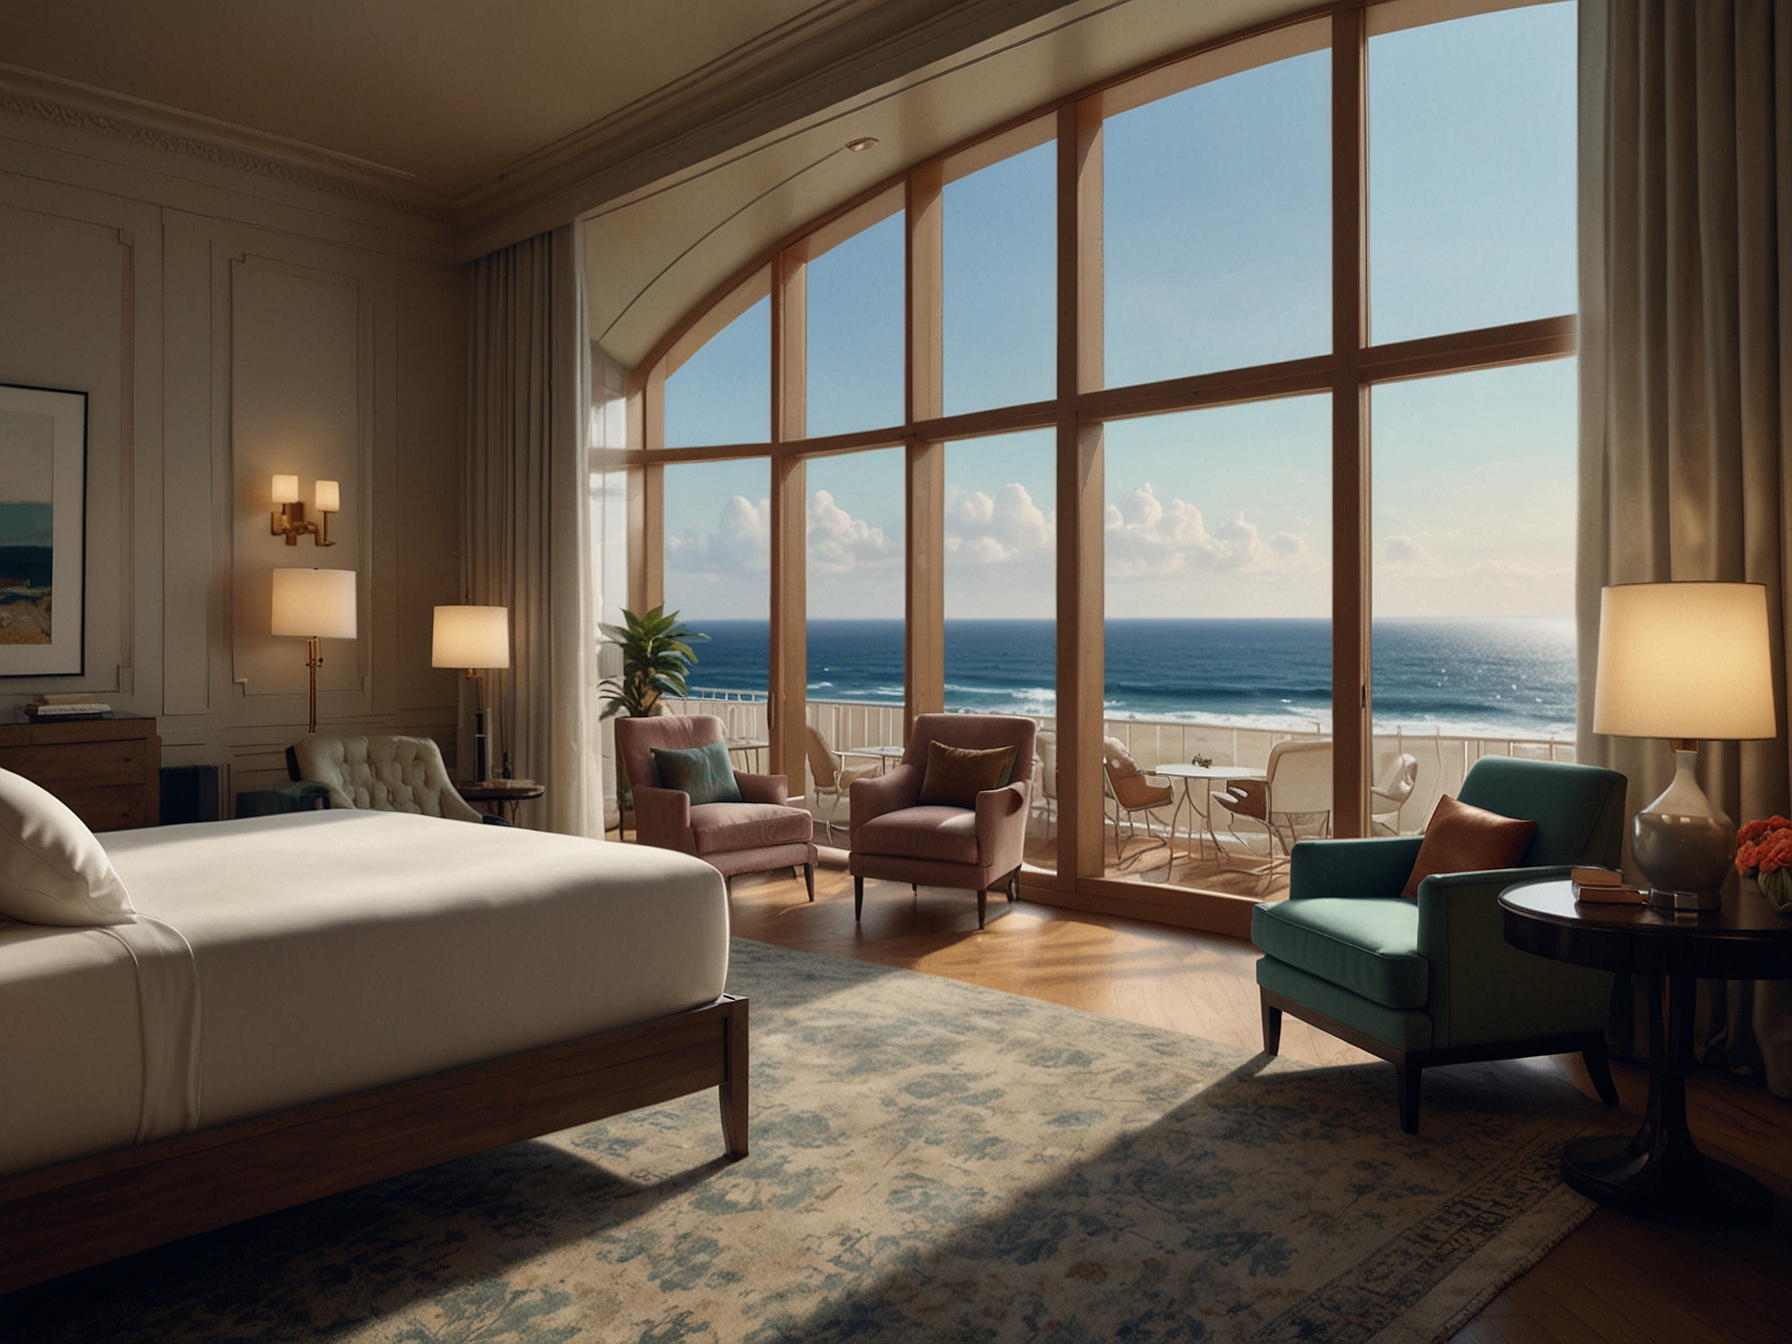 A spacious suite at Regina Biarritz Experimental featuring large windows with Atlantic Ocean views, classic and contemporary furnishings, and luxurious linens, offering ultimate comfort.